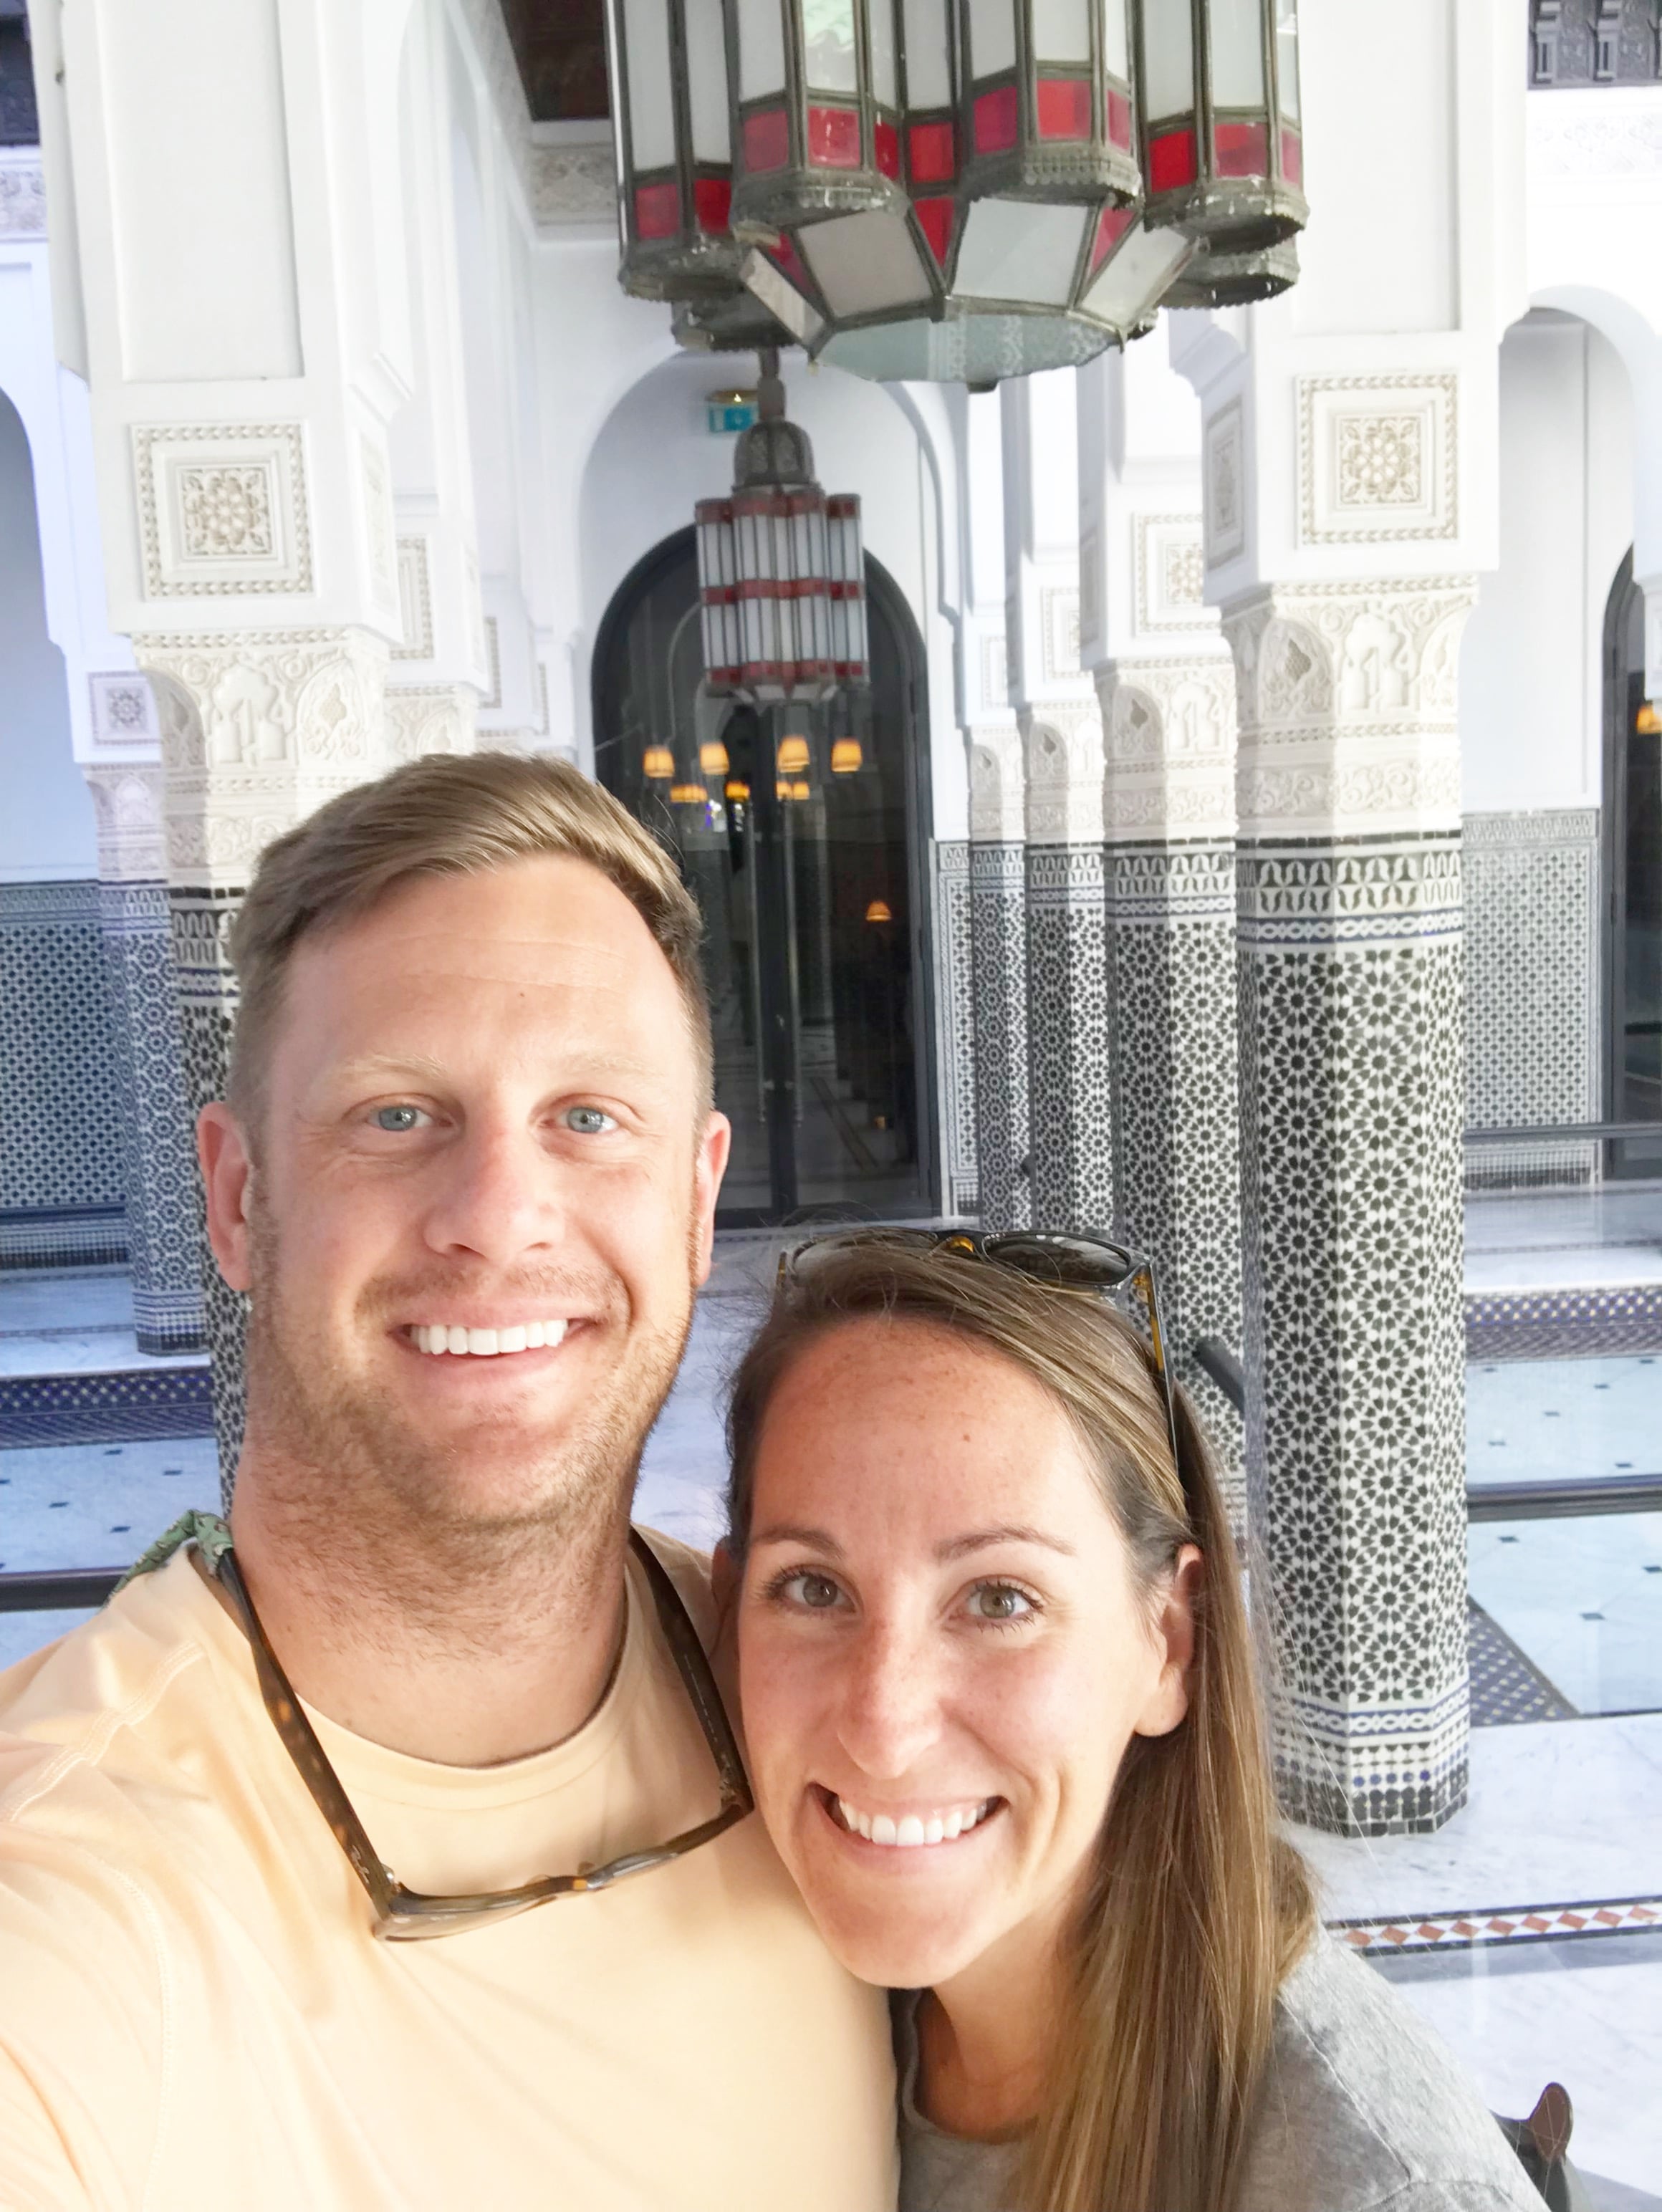 8 Things To Know Before You Go To Morocco - Traveling To Morocco - Planning A Trip To Morocco - Morocco Travel Tips - Tips For Morocco - Morocco Travel - Marrakech Travel - Fes Travel - Travel Blog Morocco - #Morocco #travelblog